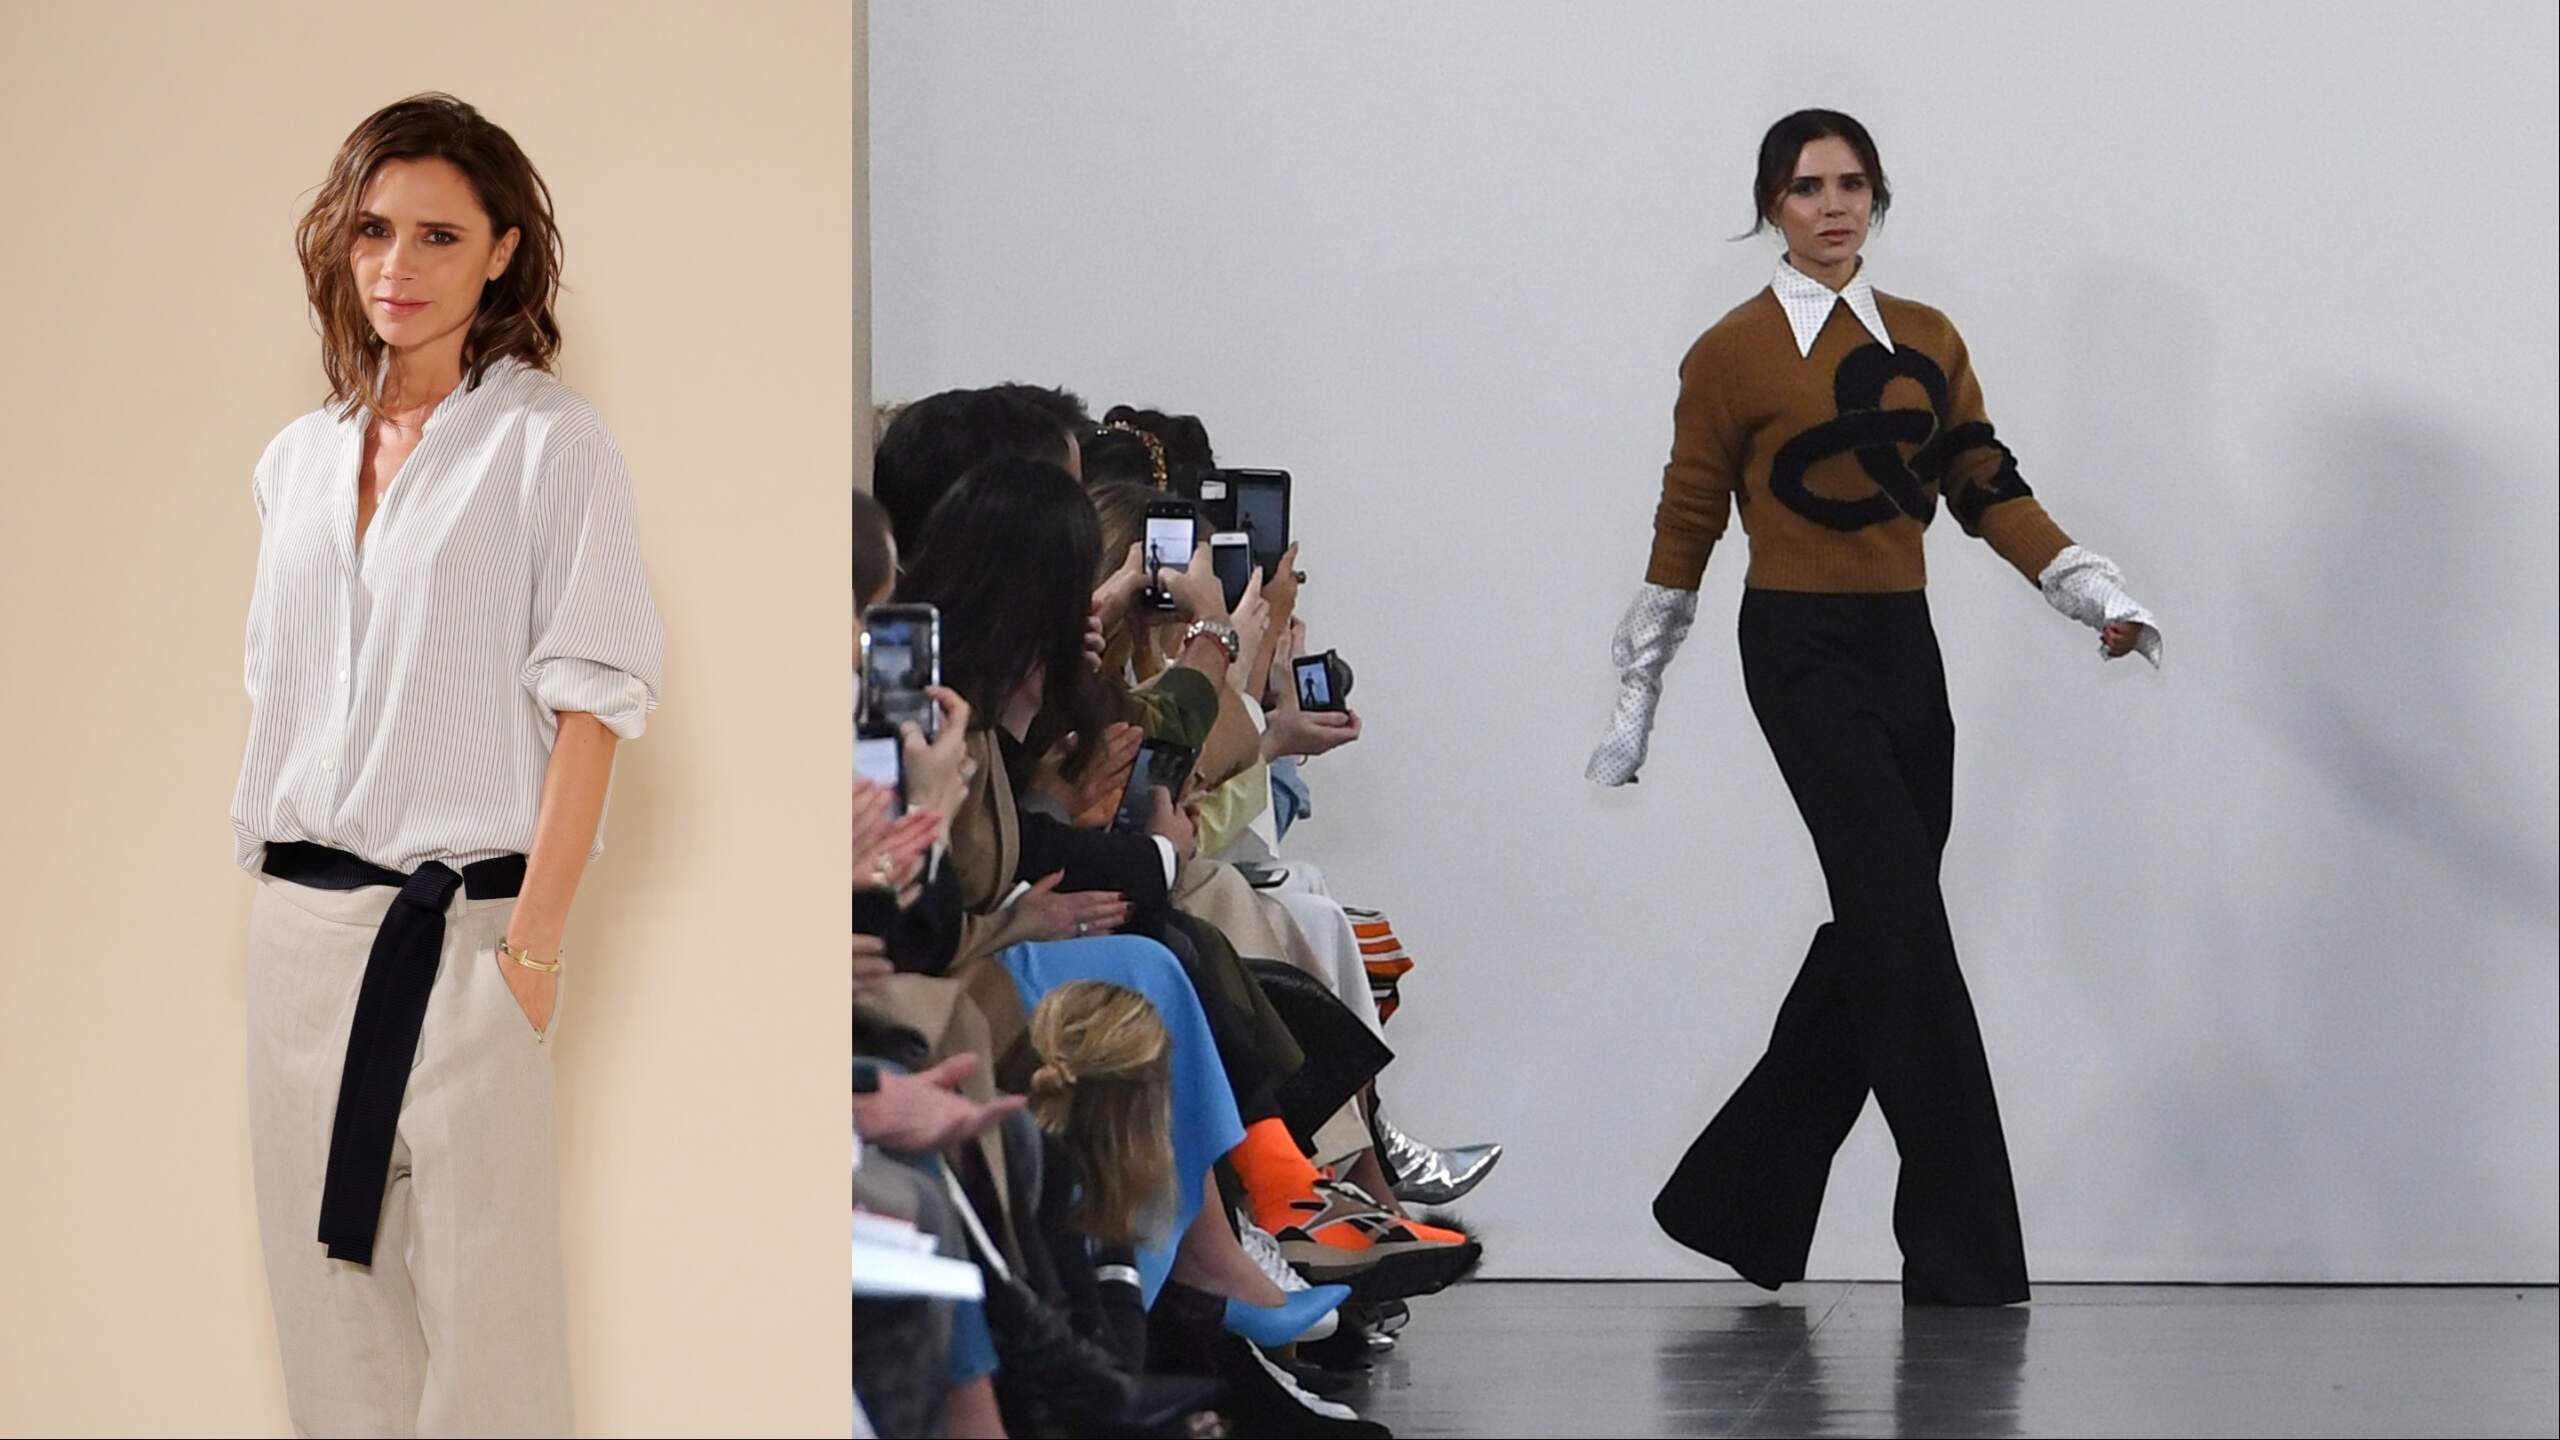 Victoria Beckham walks the runway at the Victoria Beckham fashion shows, wearing neutral colors